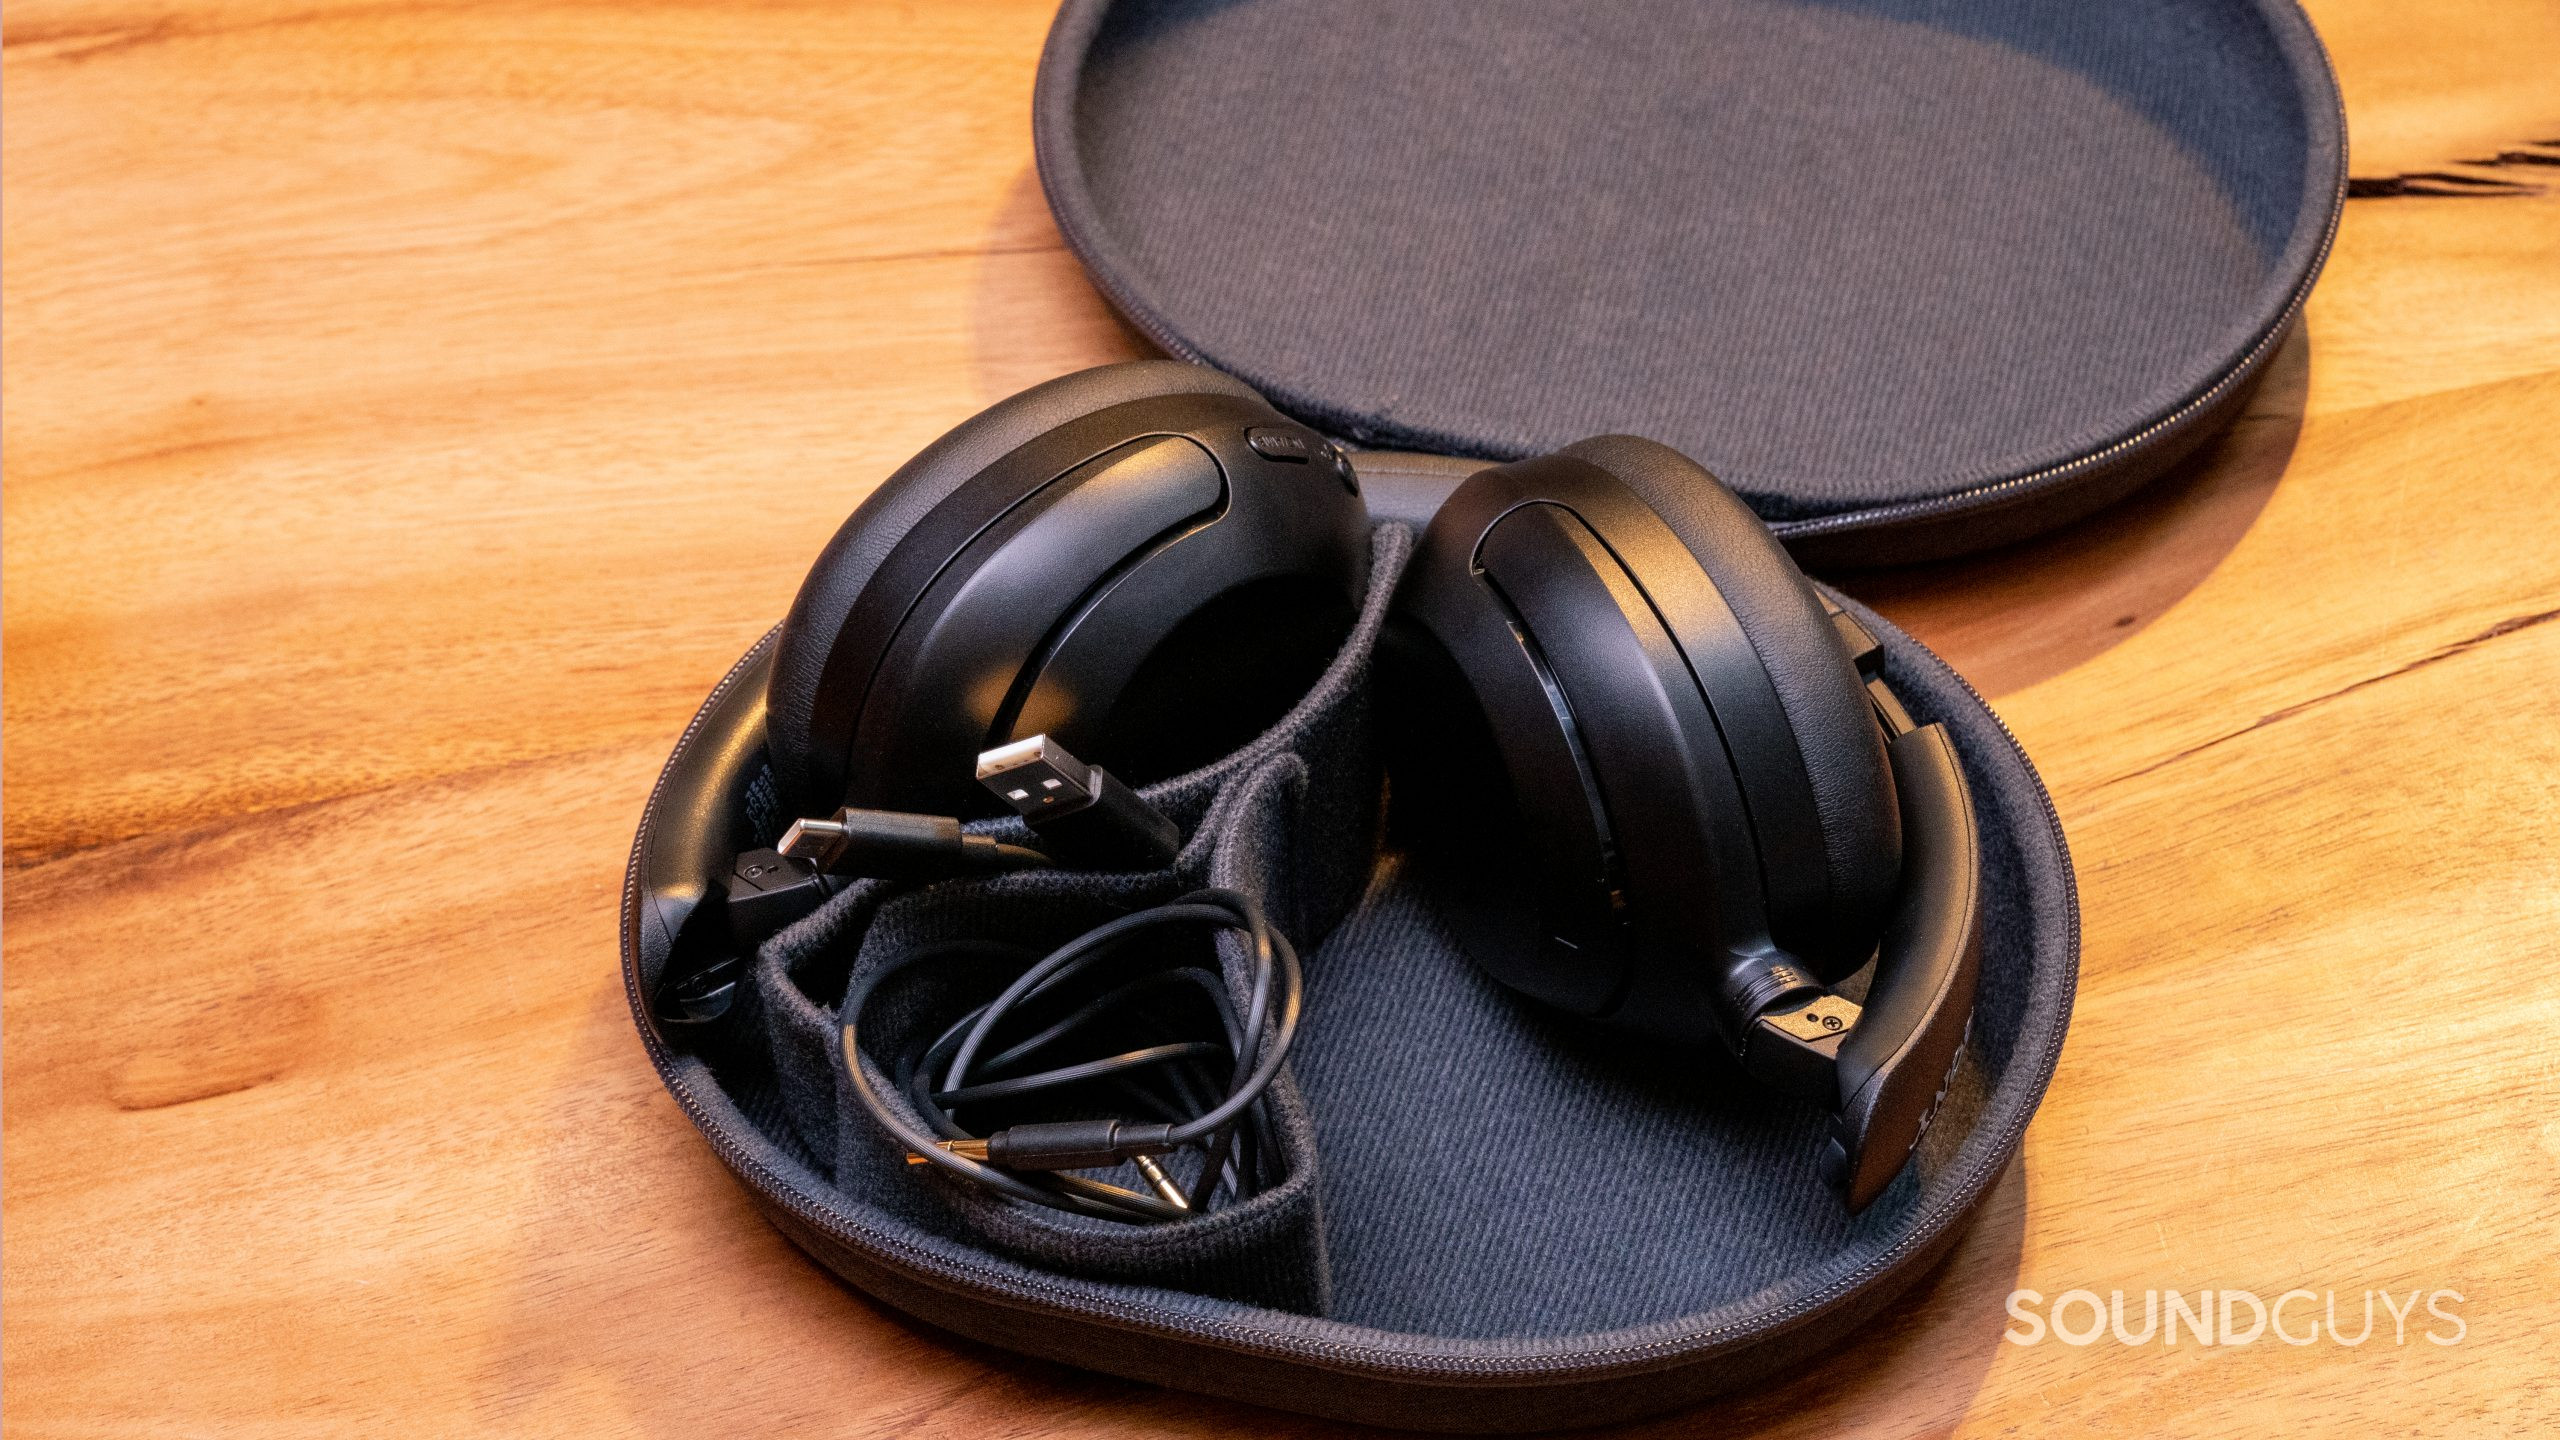 Sony's WH-XB910N headphones go big on bass without breaking the bank